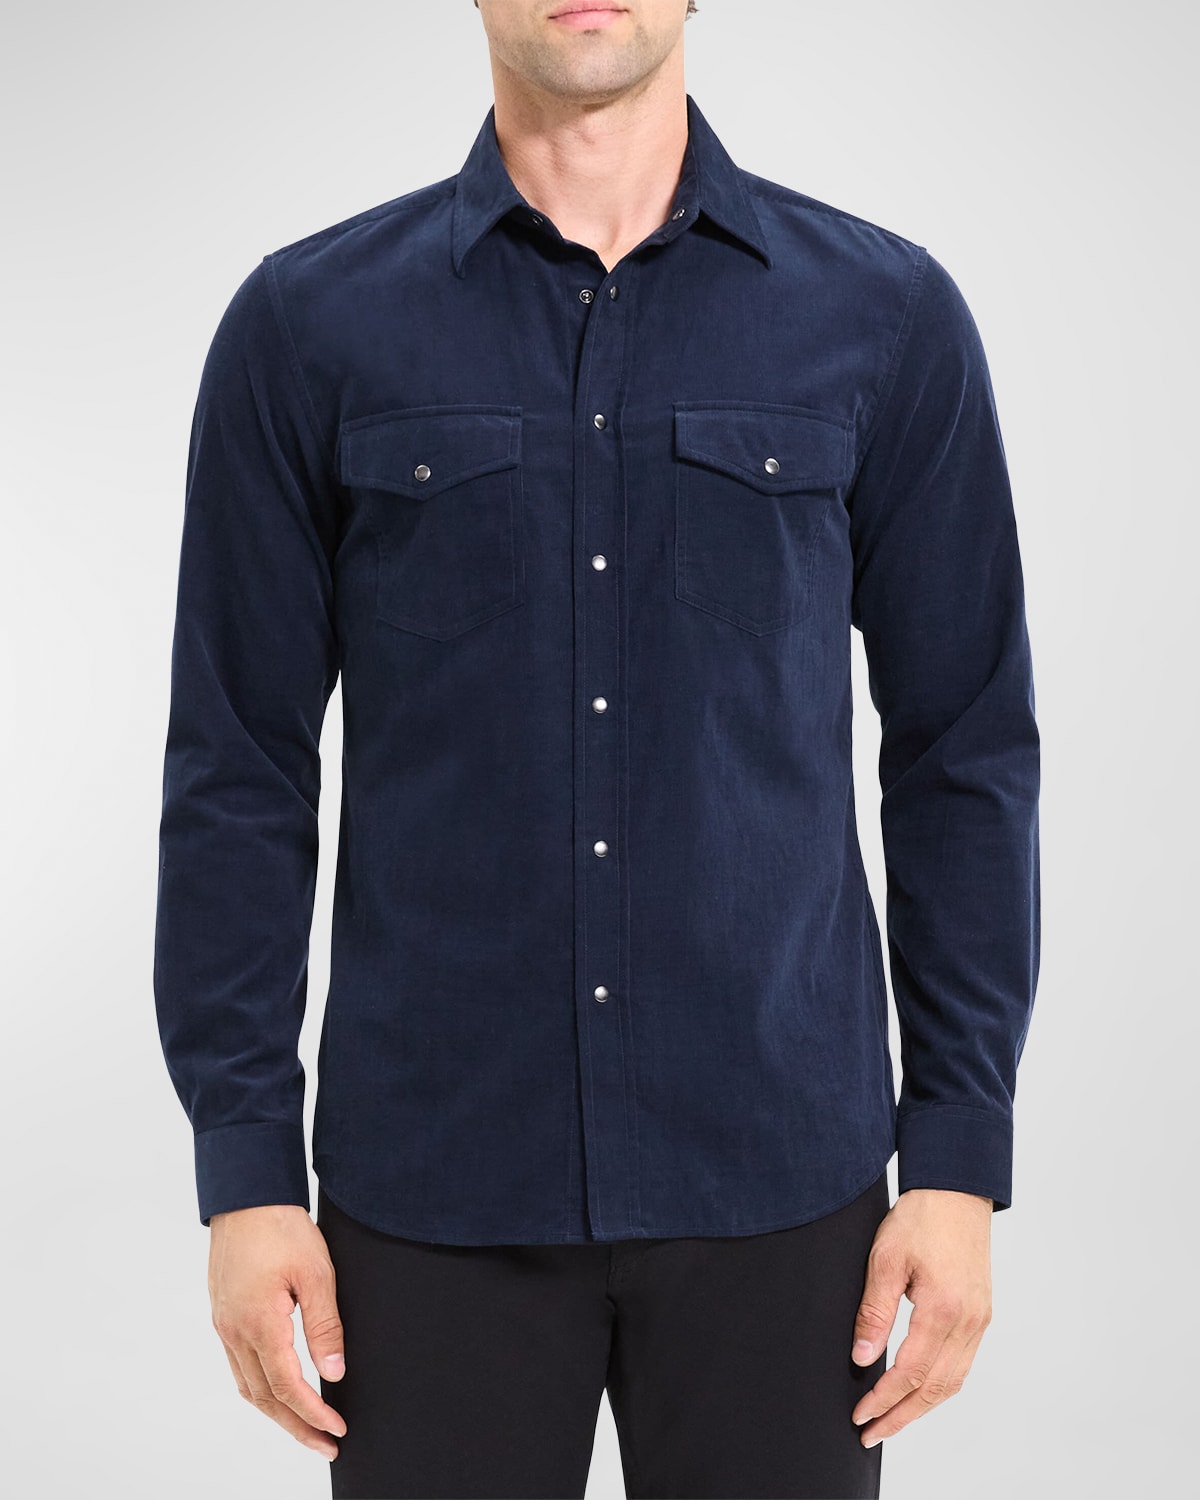 THEORY MEN'S IRVING SNAP SHIRT IN JAZZ MICRO CORD